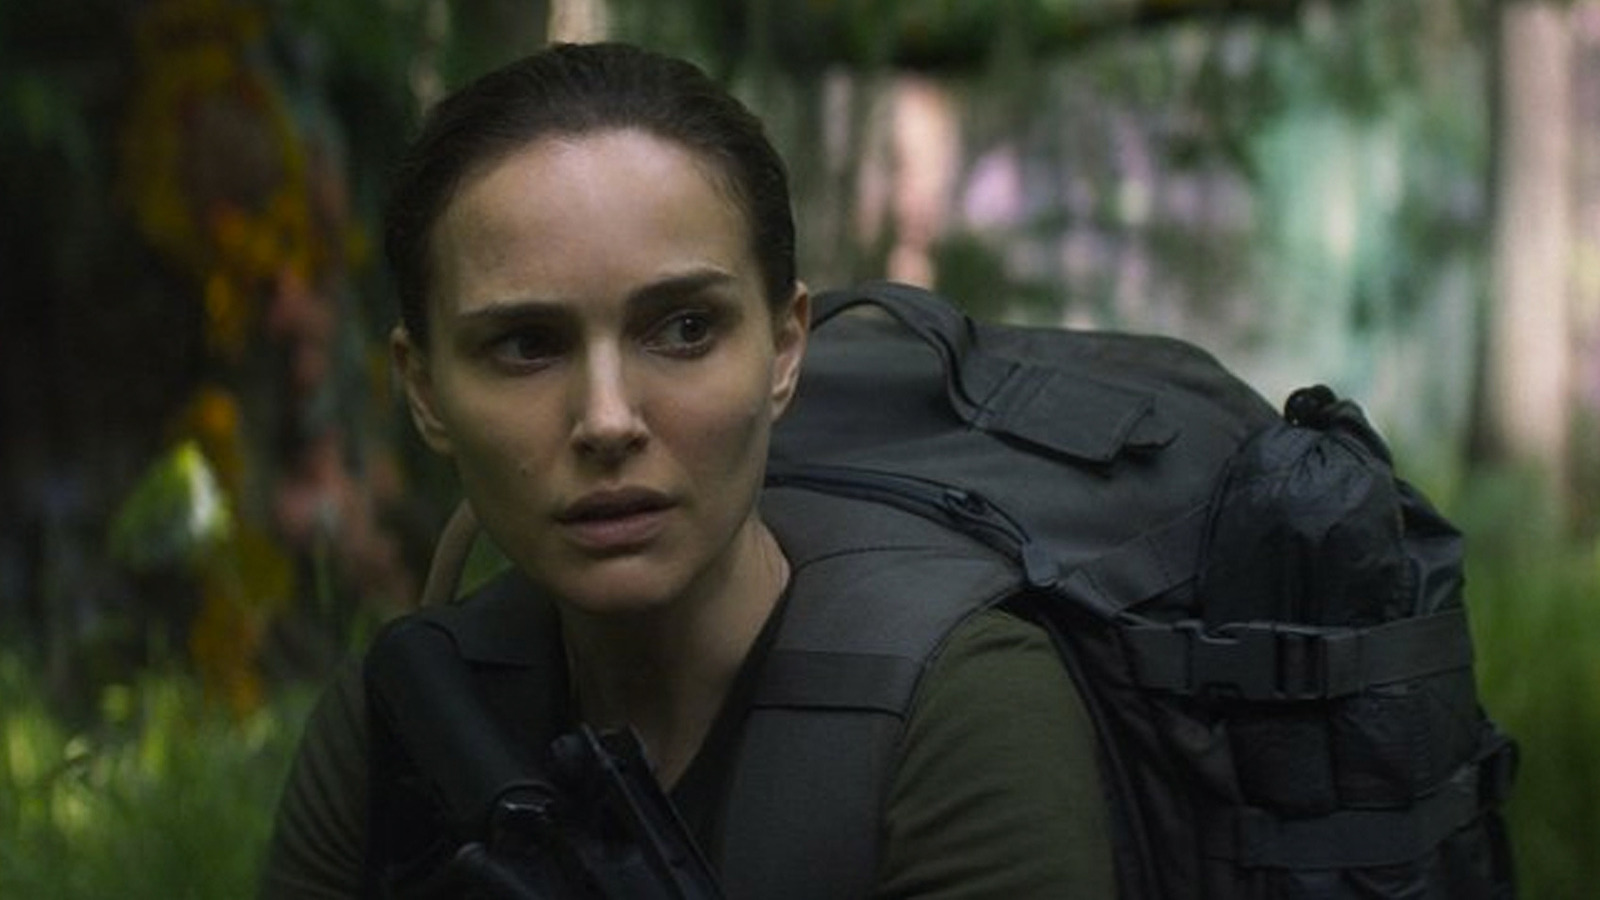 Annihilation's Trippy Nature Was A Tricky Problem For Screenwriters To Solve